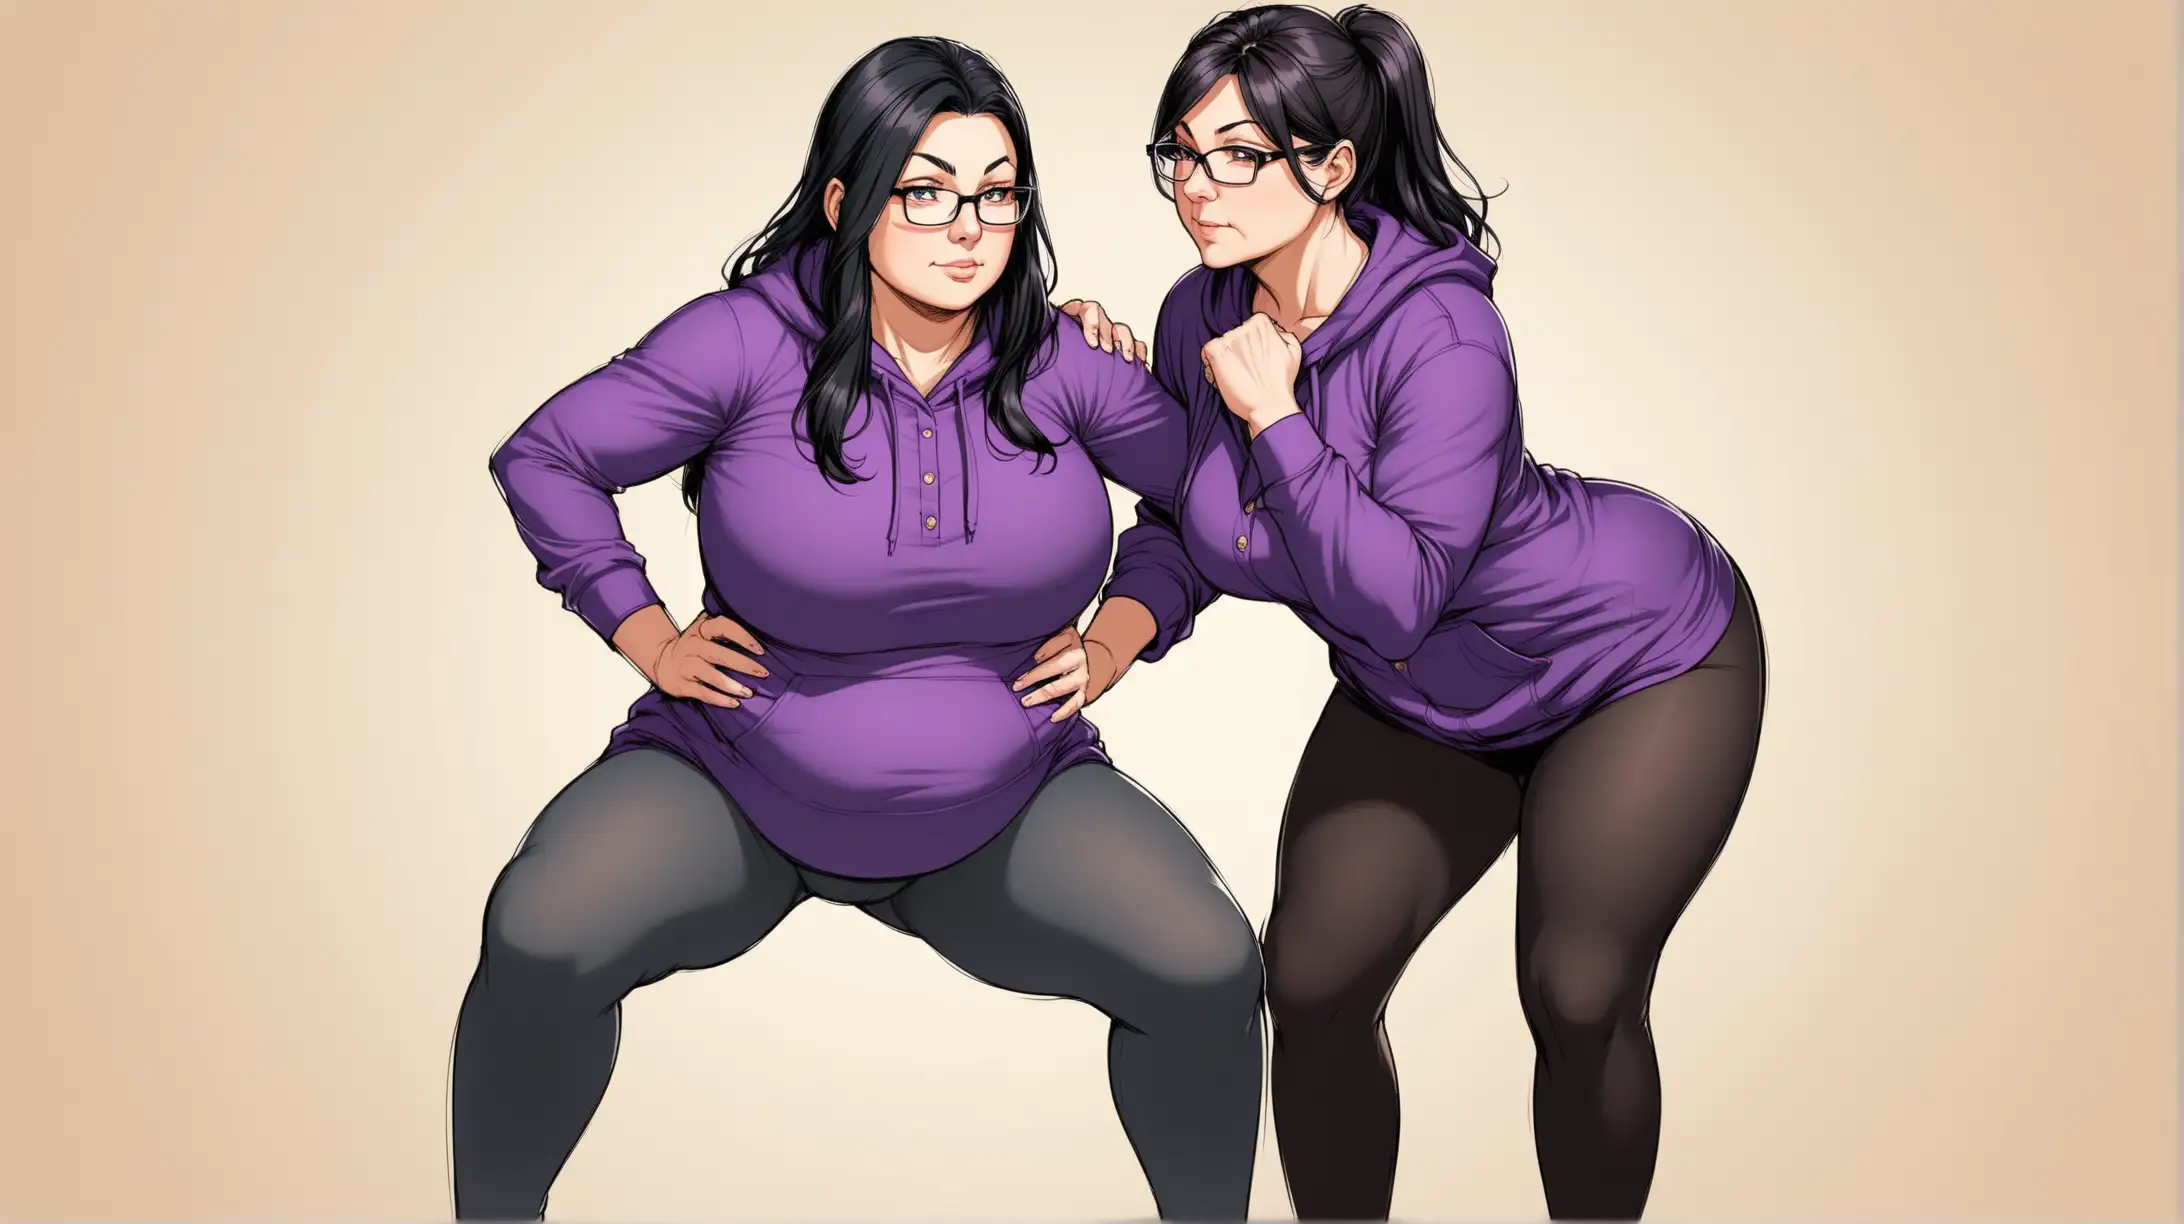 Mother and Daughter Doing Squats Together in Stylish Outfits